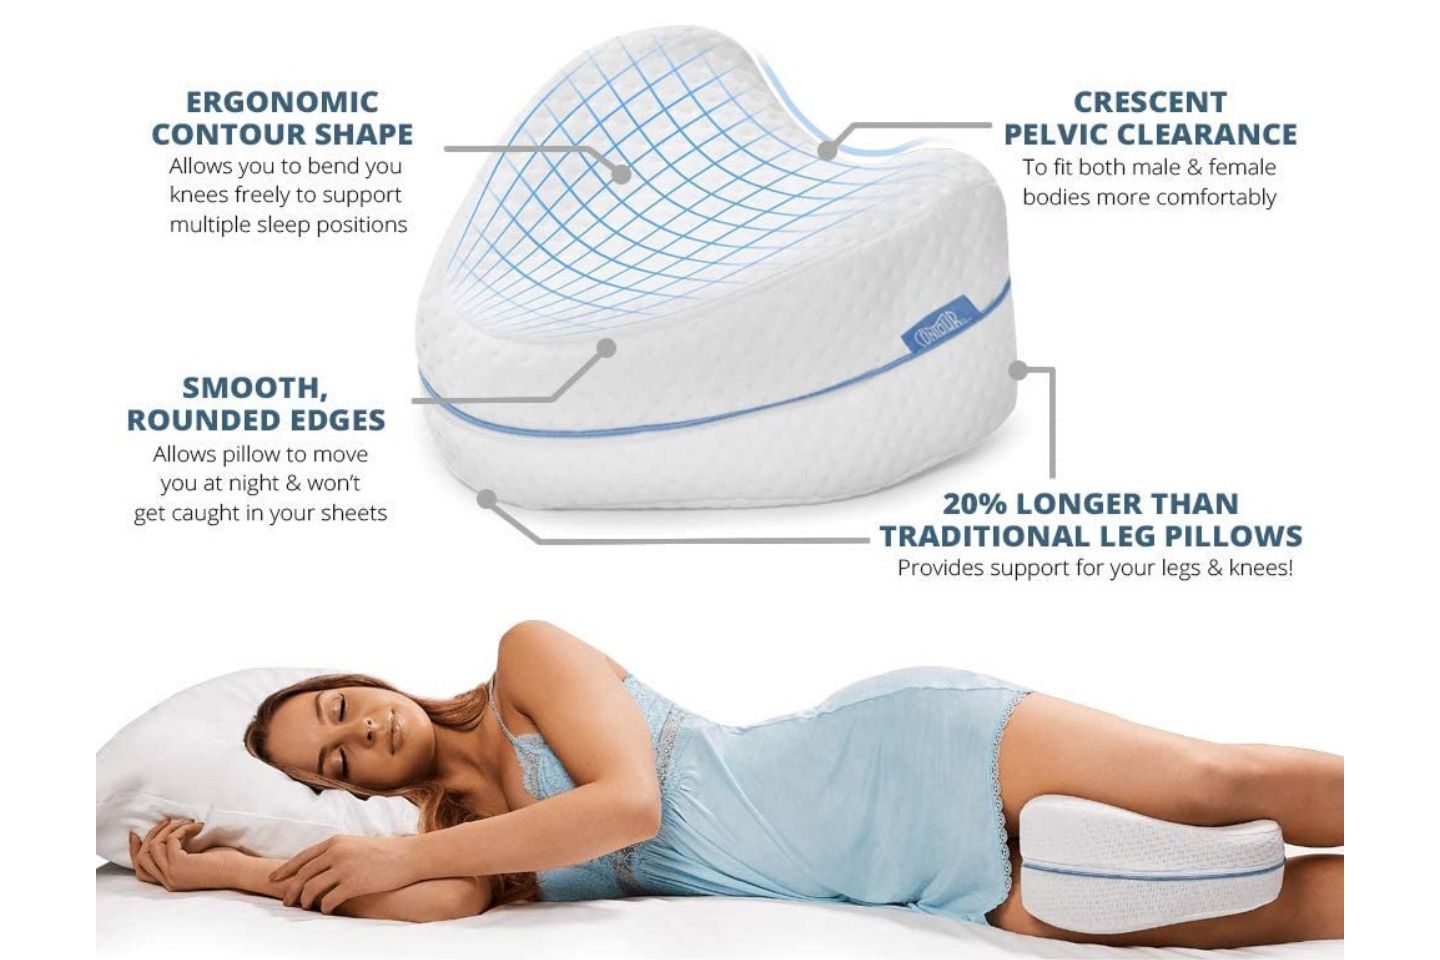 How To Choose the Best Pillow for Hip Pain as a Side Sleeper